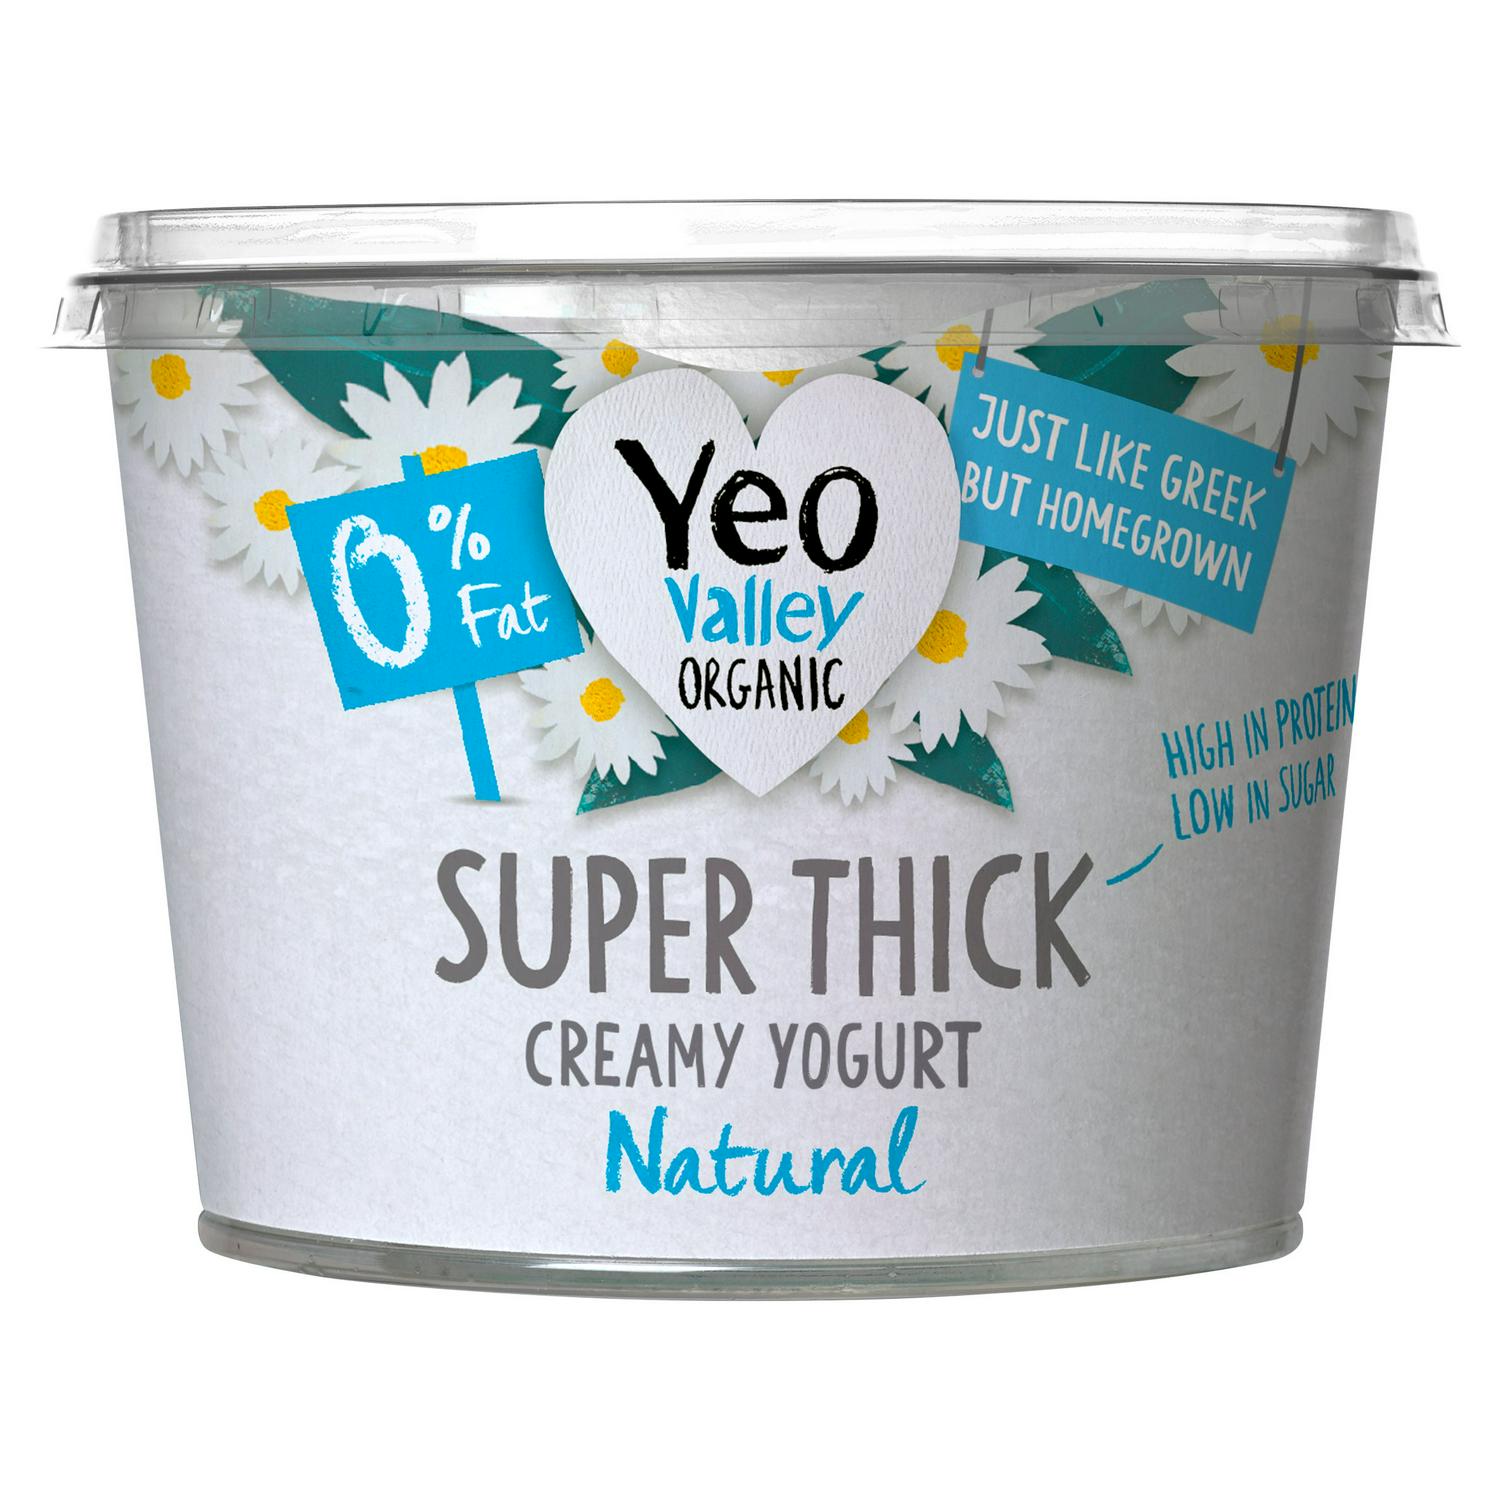 YEO VALLEY Super Thick 0% Natural Yoghurt, 450g